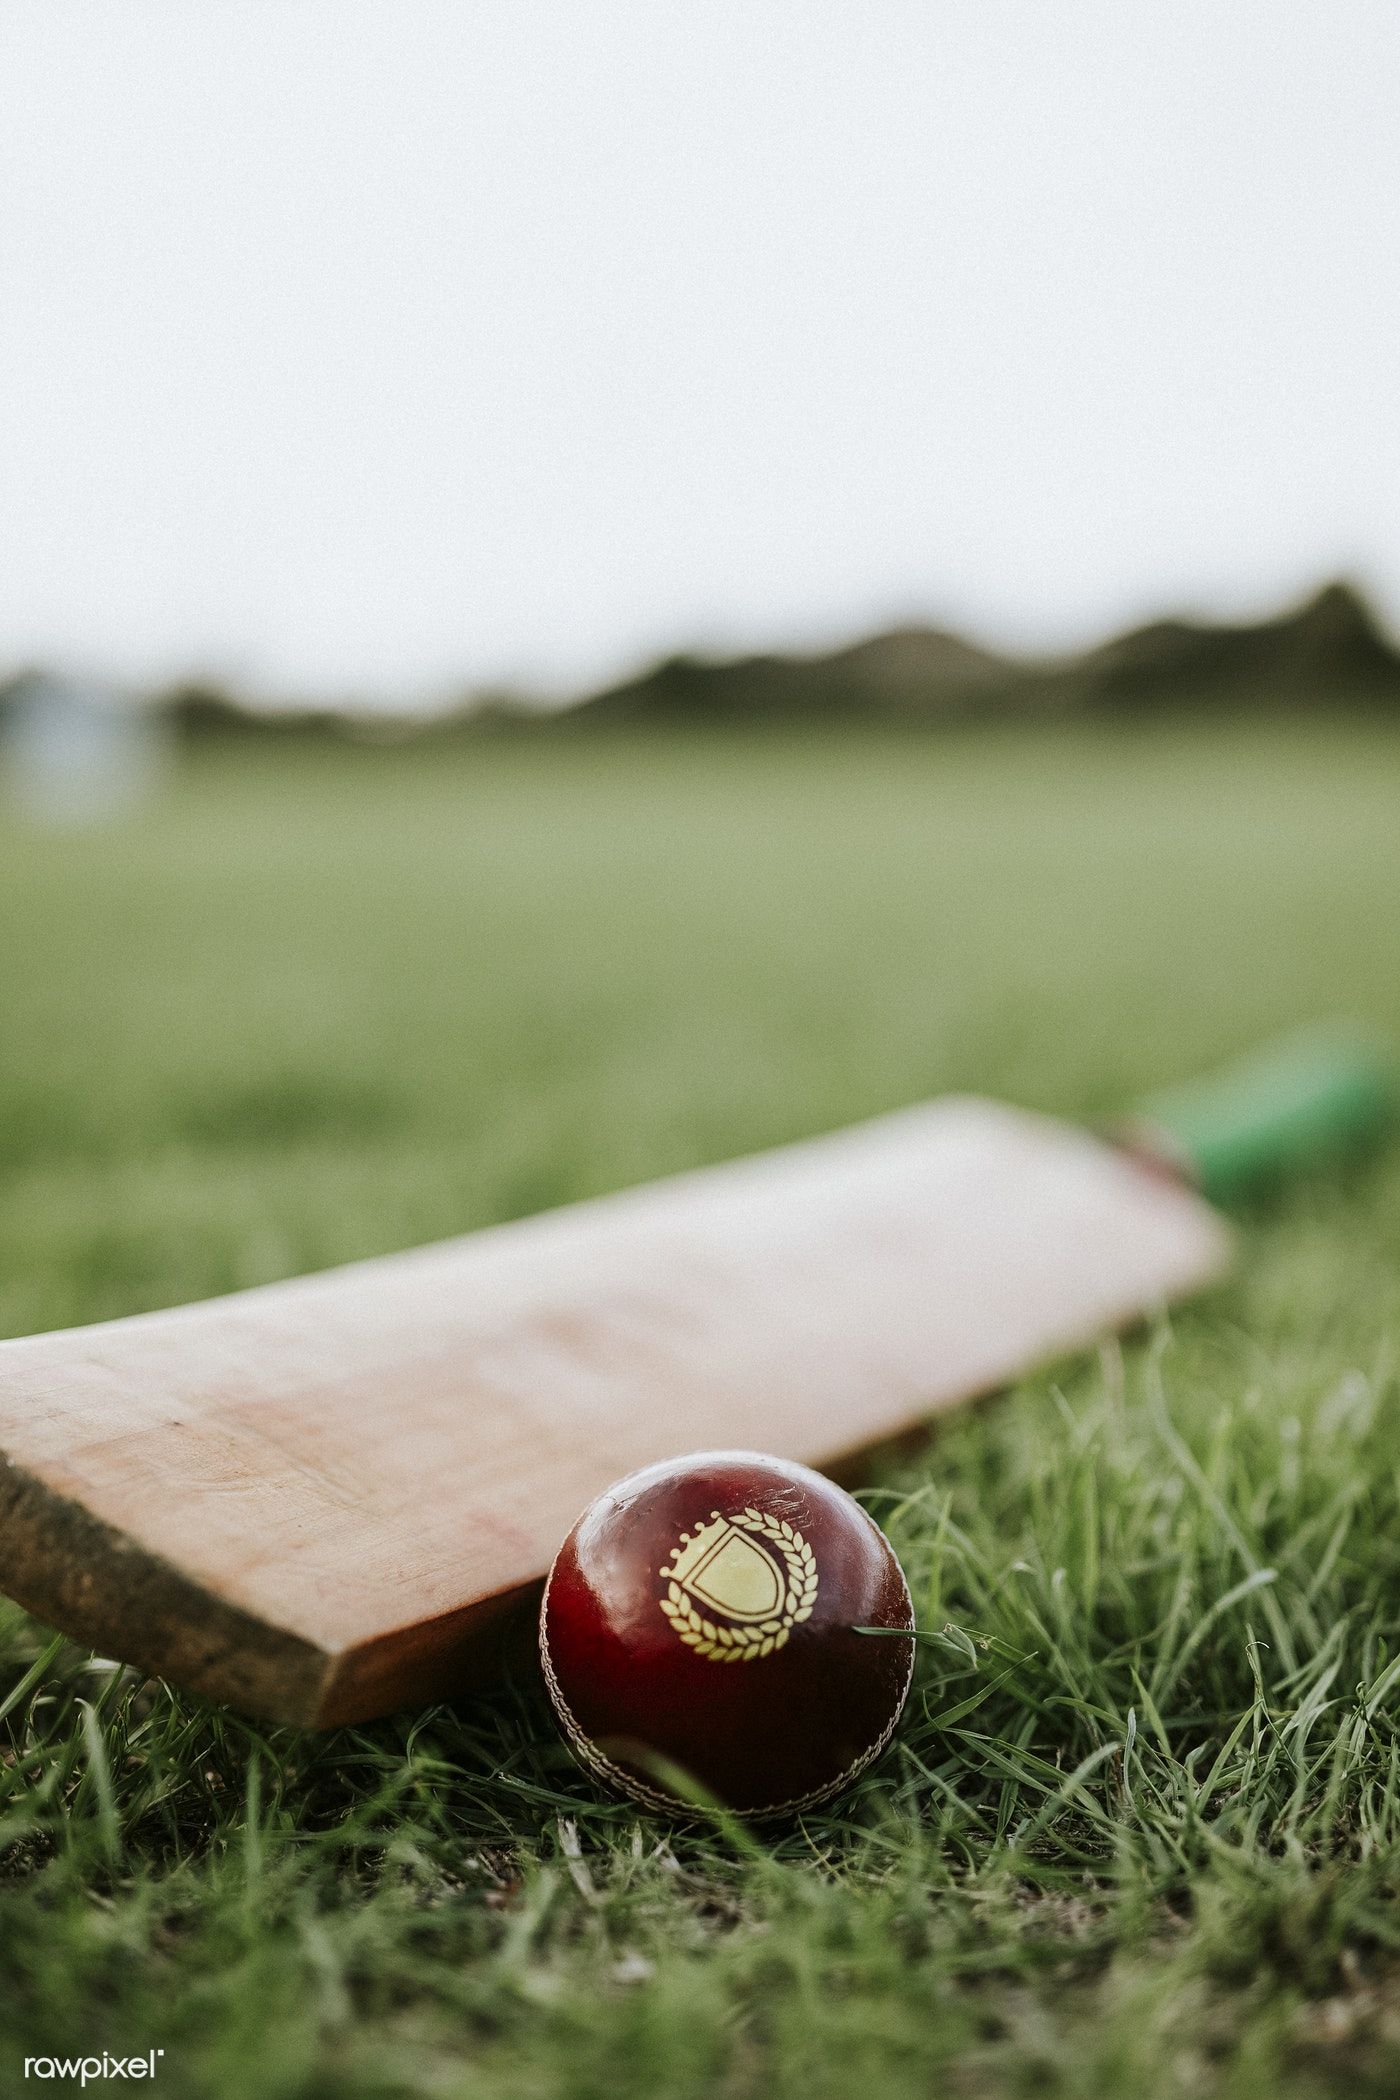 cricket bat and ball images download